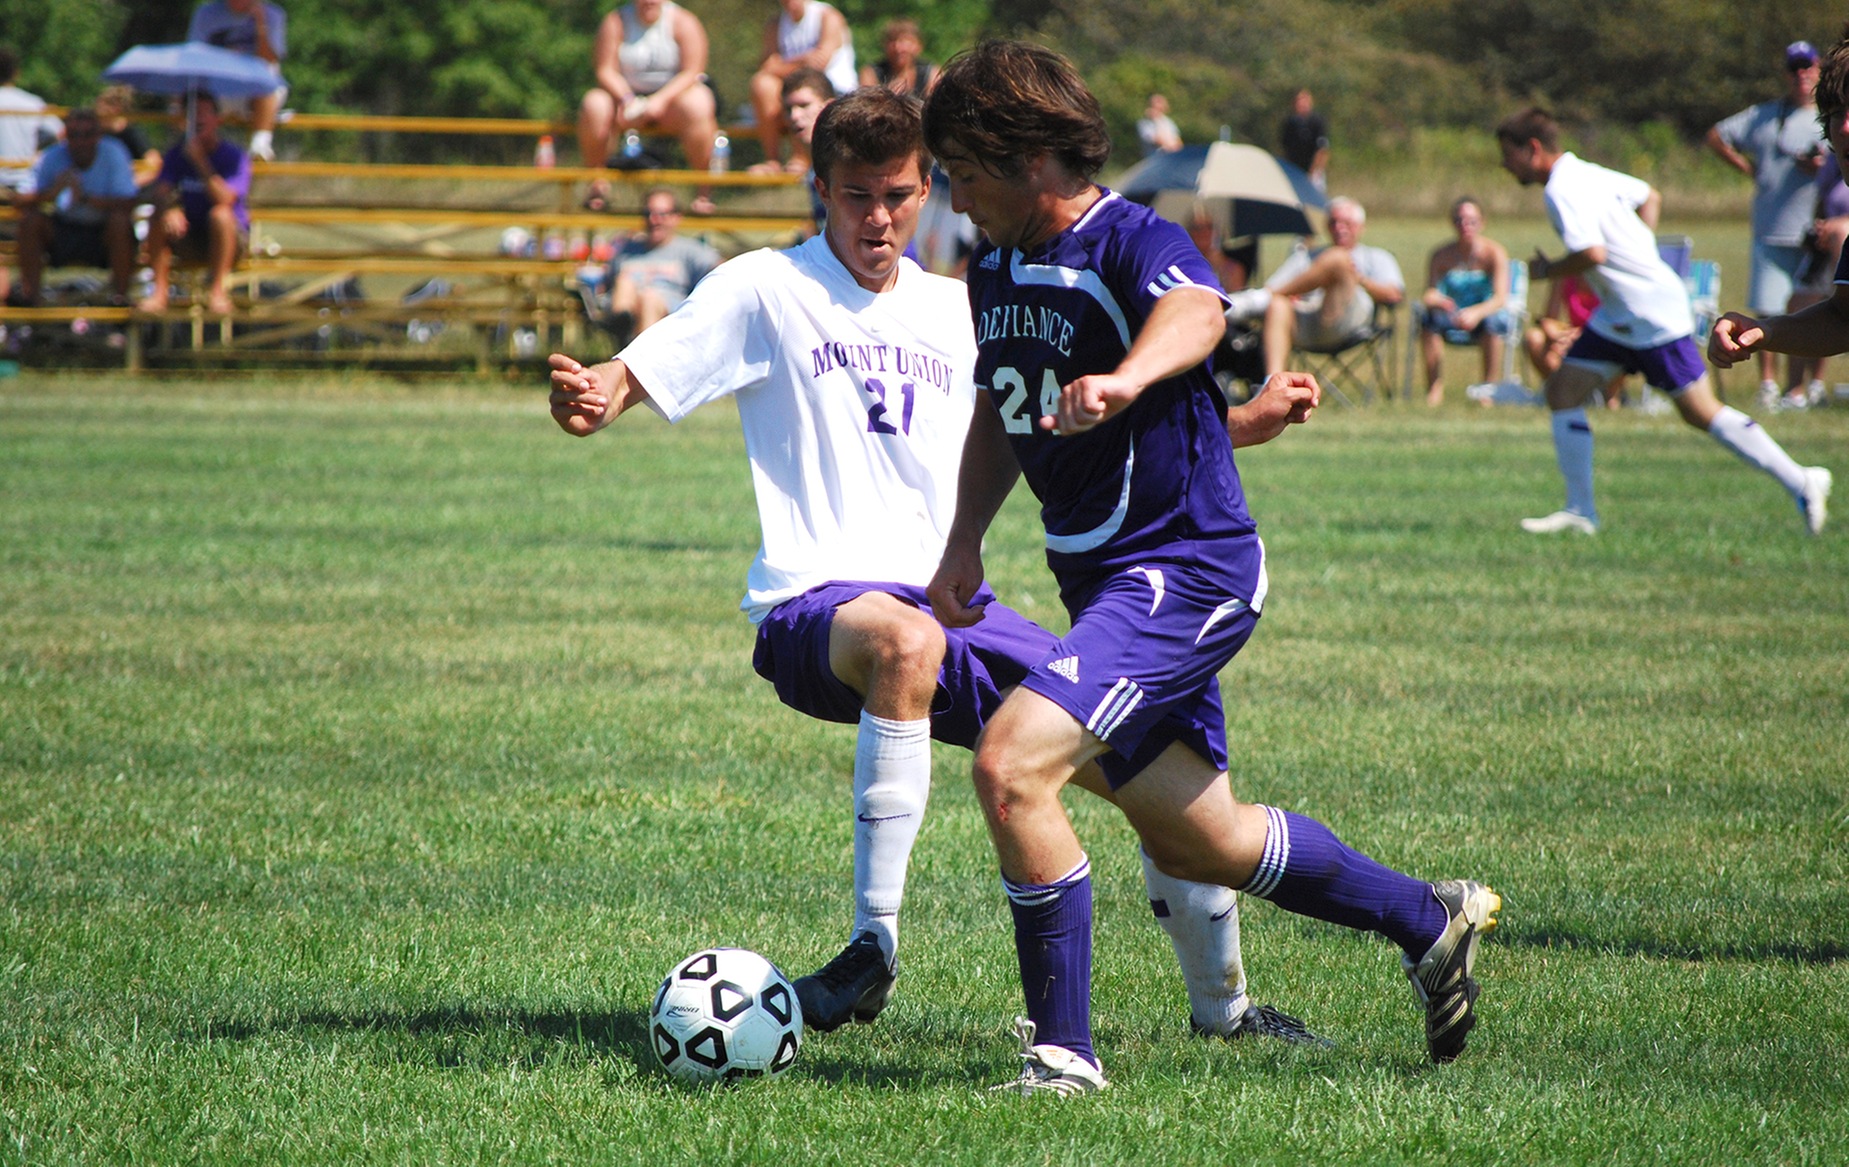 Hanover Blanks Yellow Jackets in HCAC Action